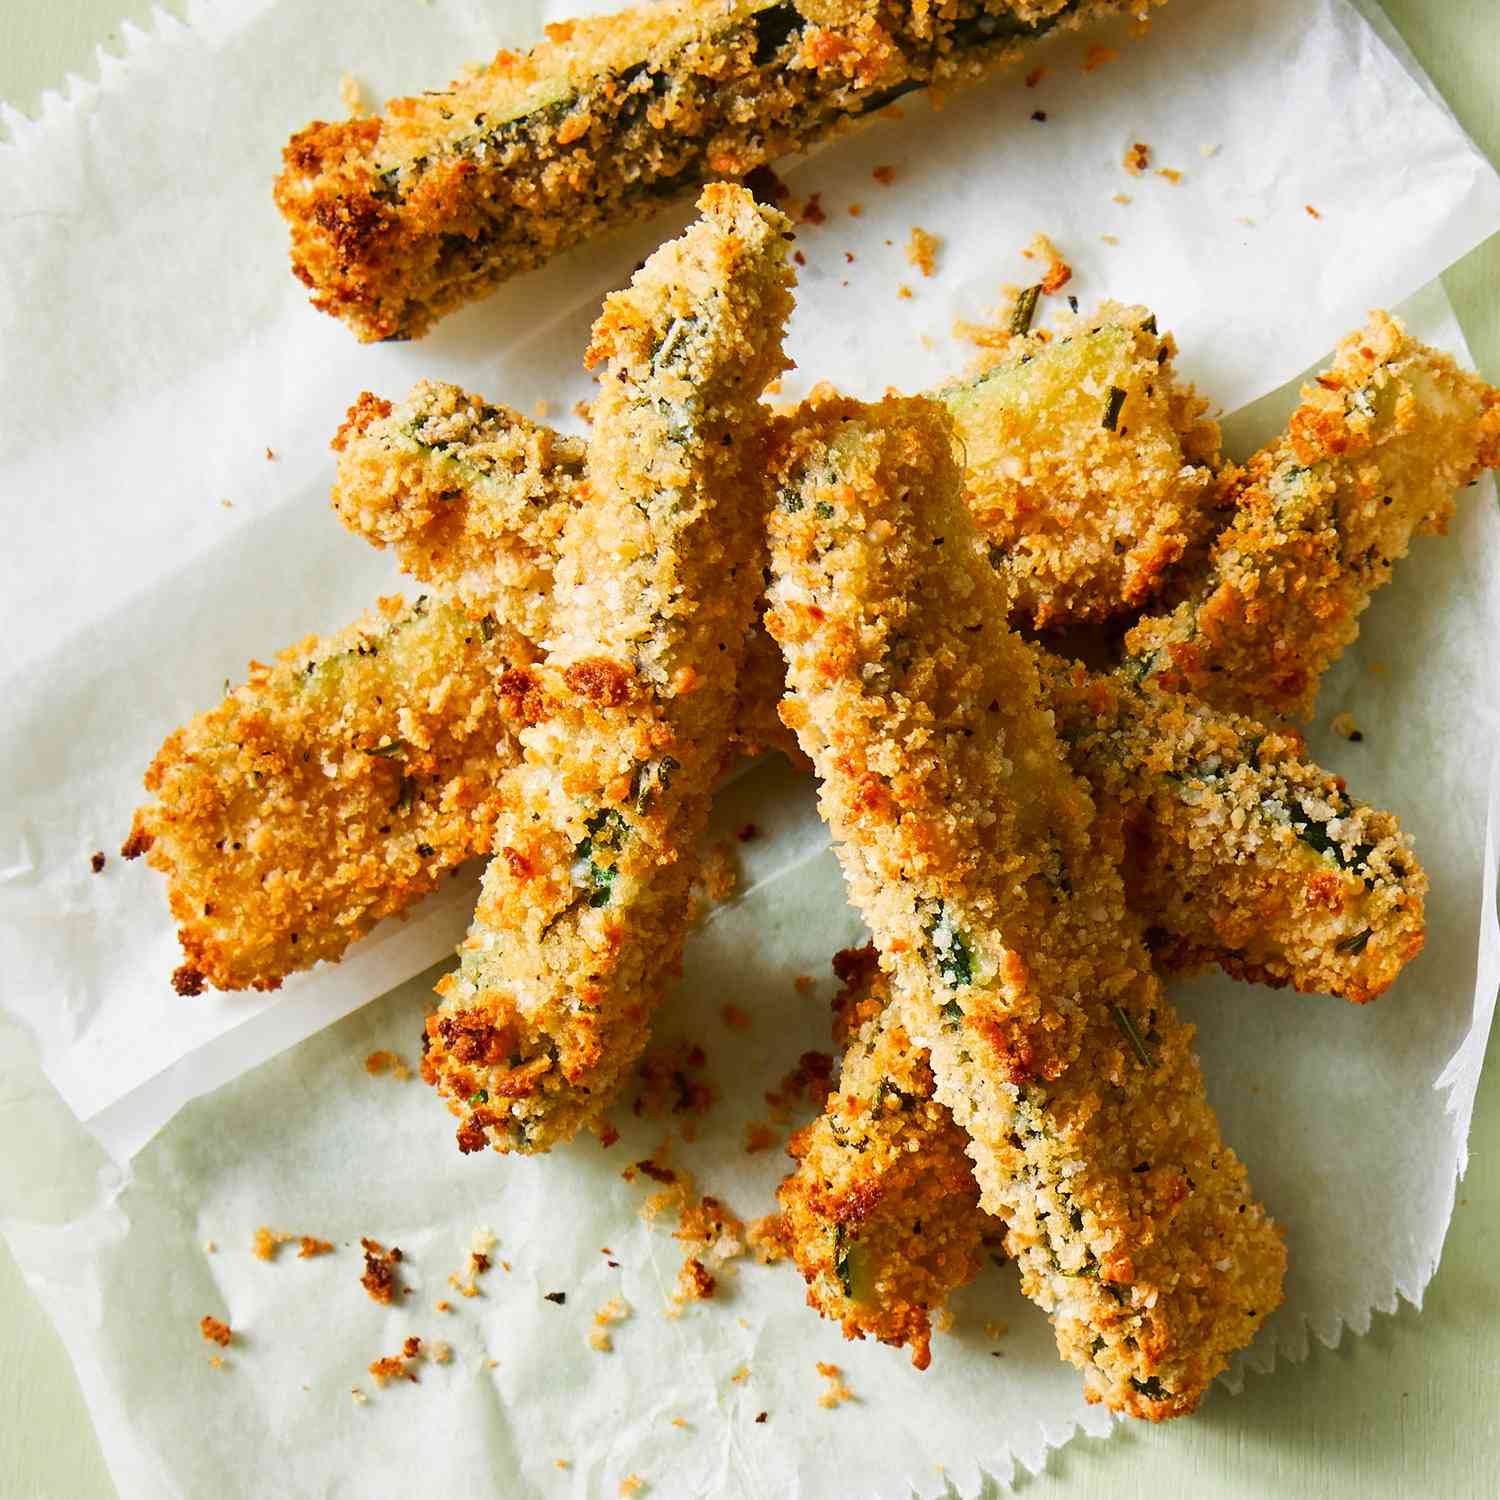 Parmesan-Rosemary Baked Zucchini Fries